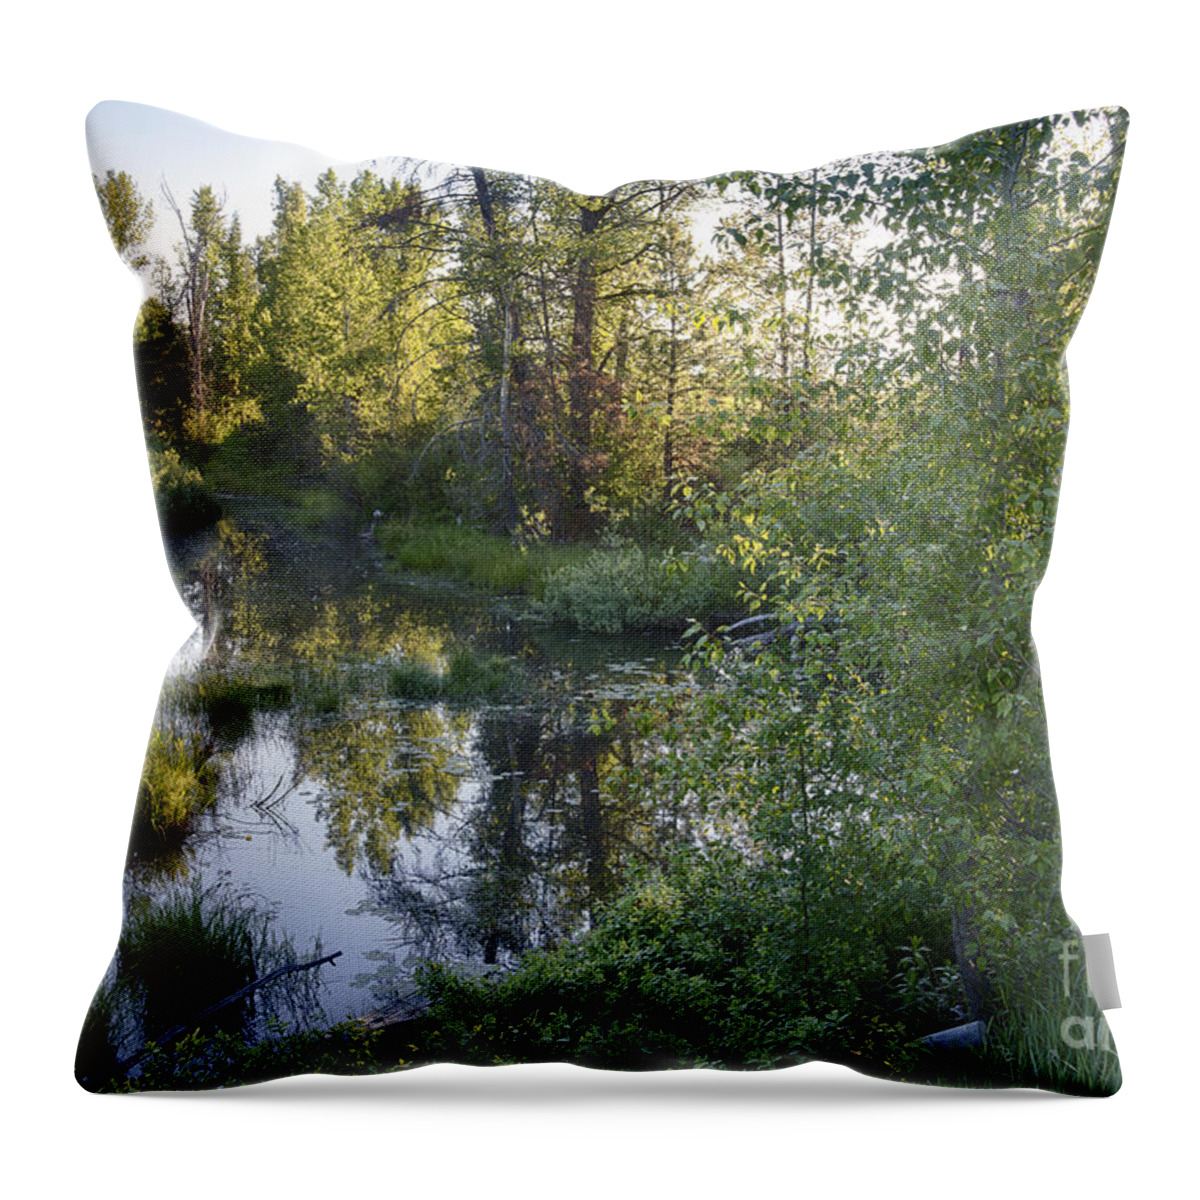 Idaho Throw Pillow featuring the photograph Lake Fork Creek by Idaho Scenic Images Linda Lantzy